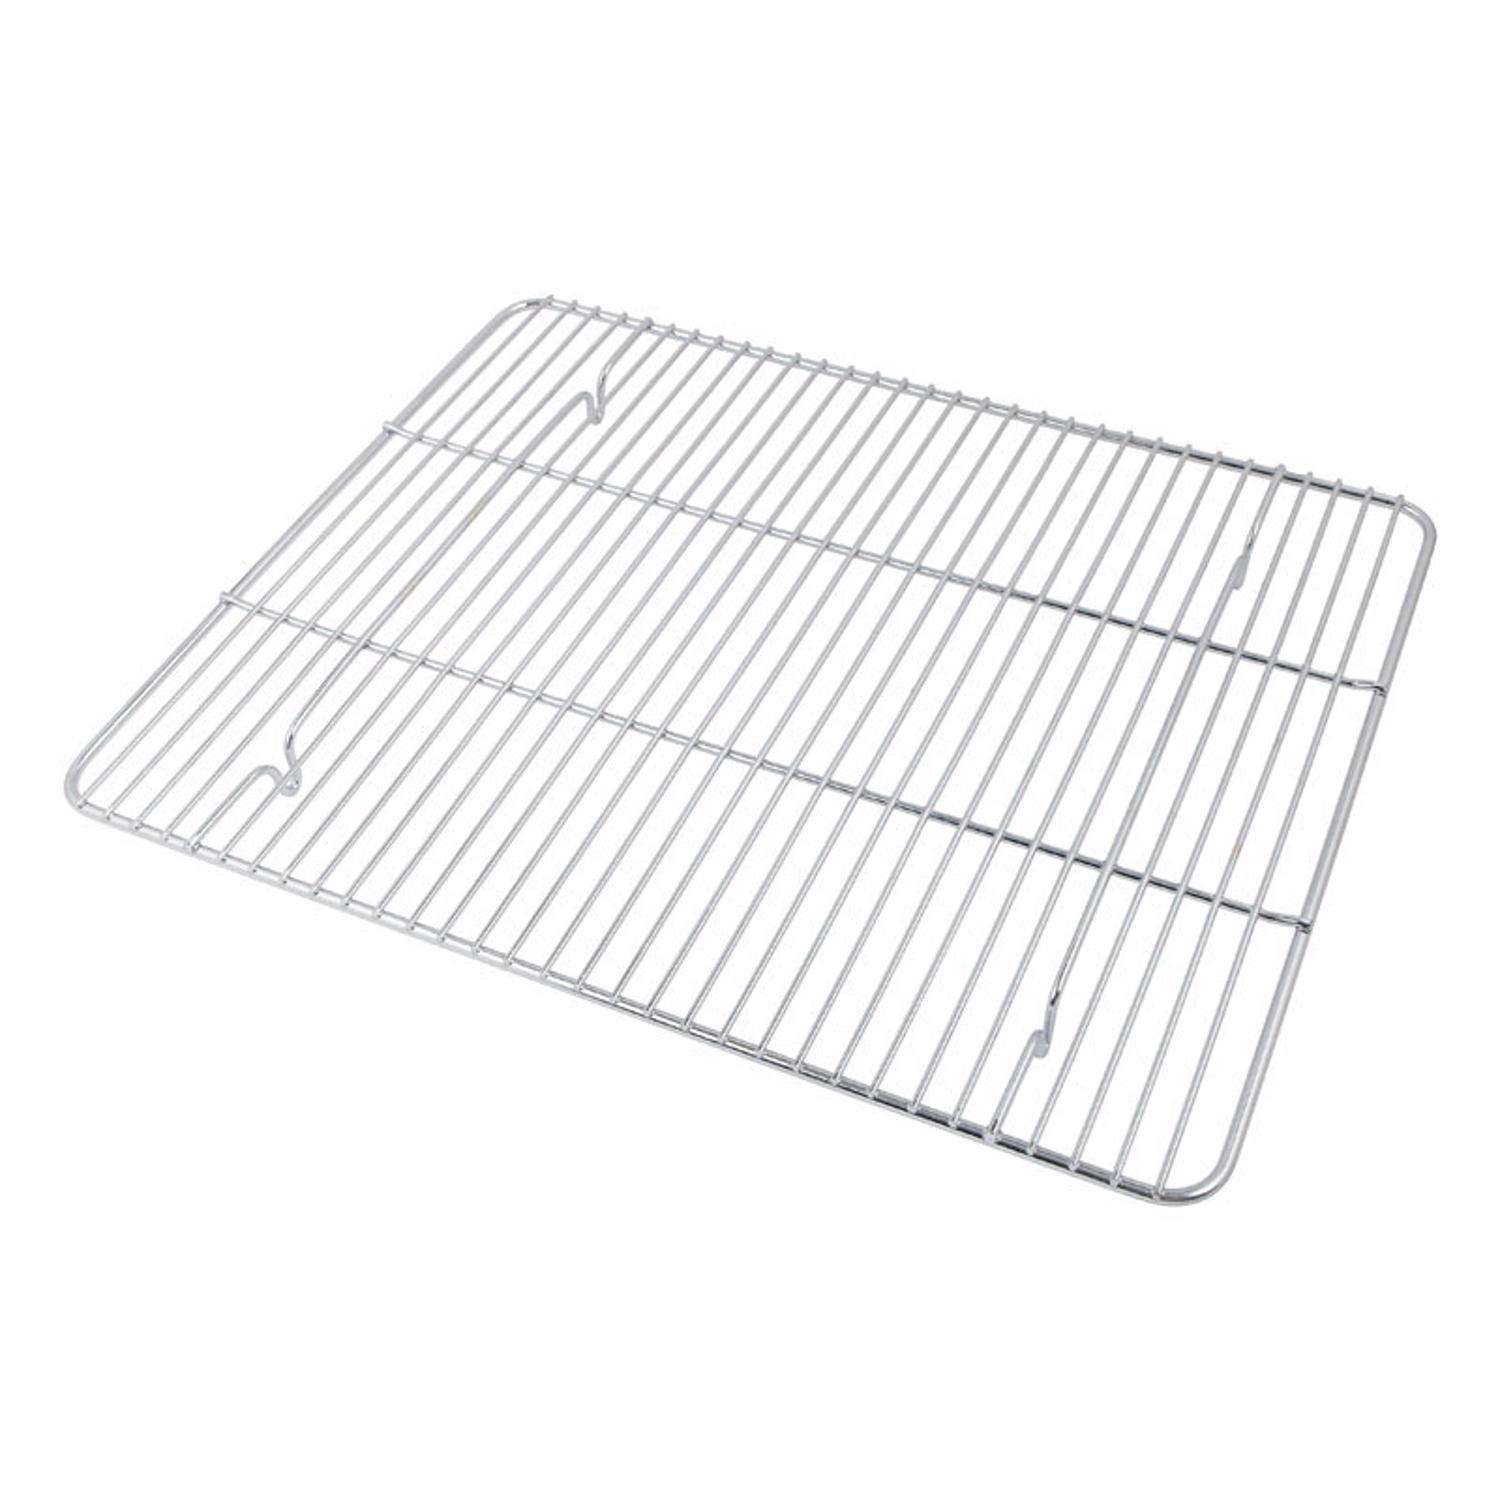 Silicon Mat for PERFO-SAFE* Wire Baskets and Shelves